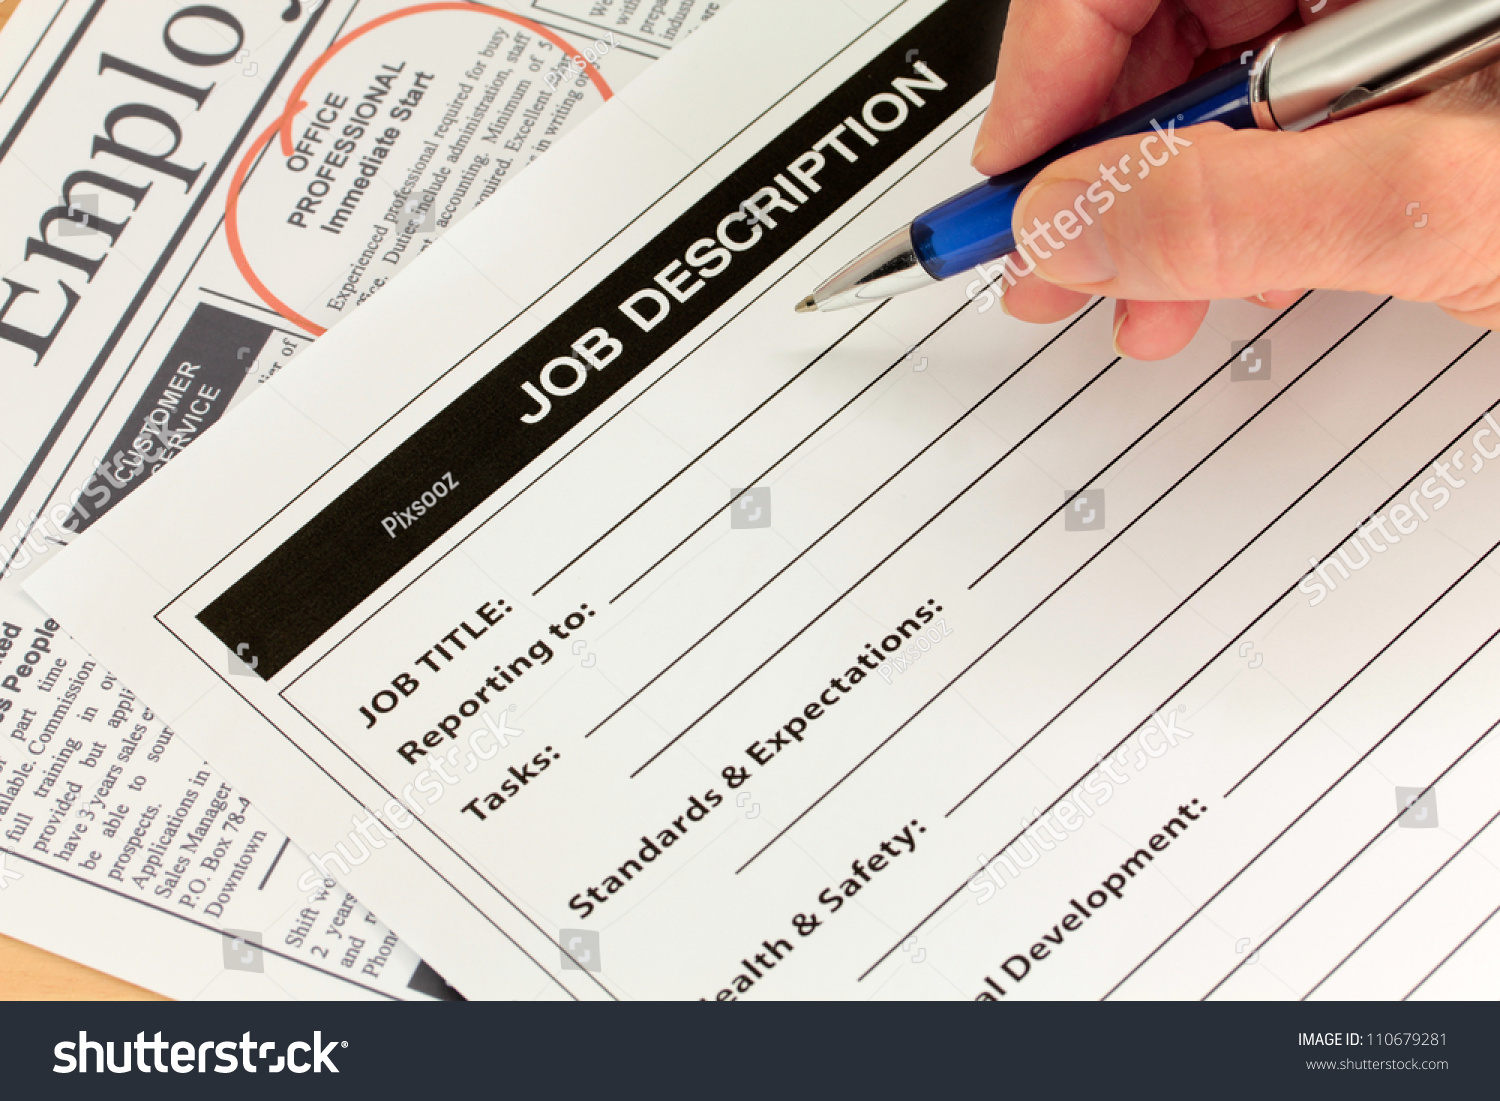 Job Description with Hand and Pen and Newspaper Ad #110679281